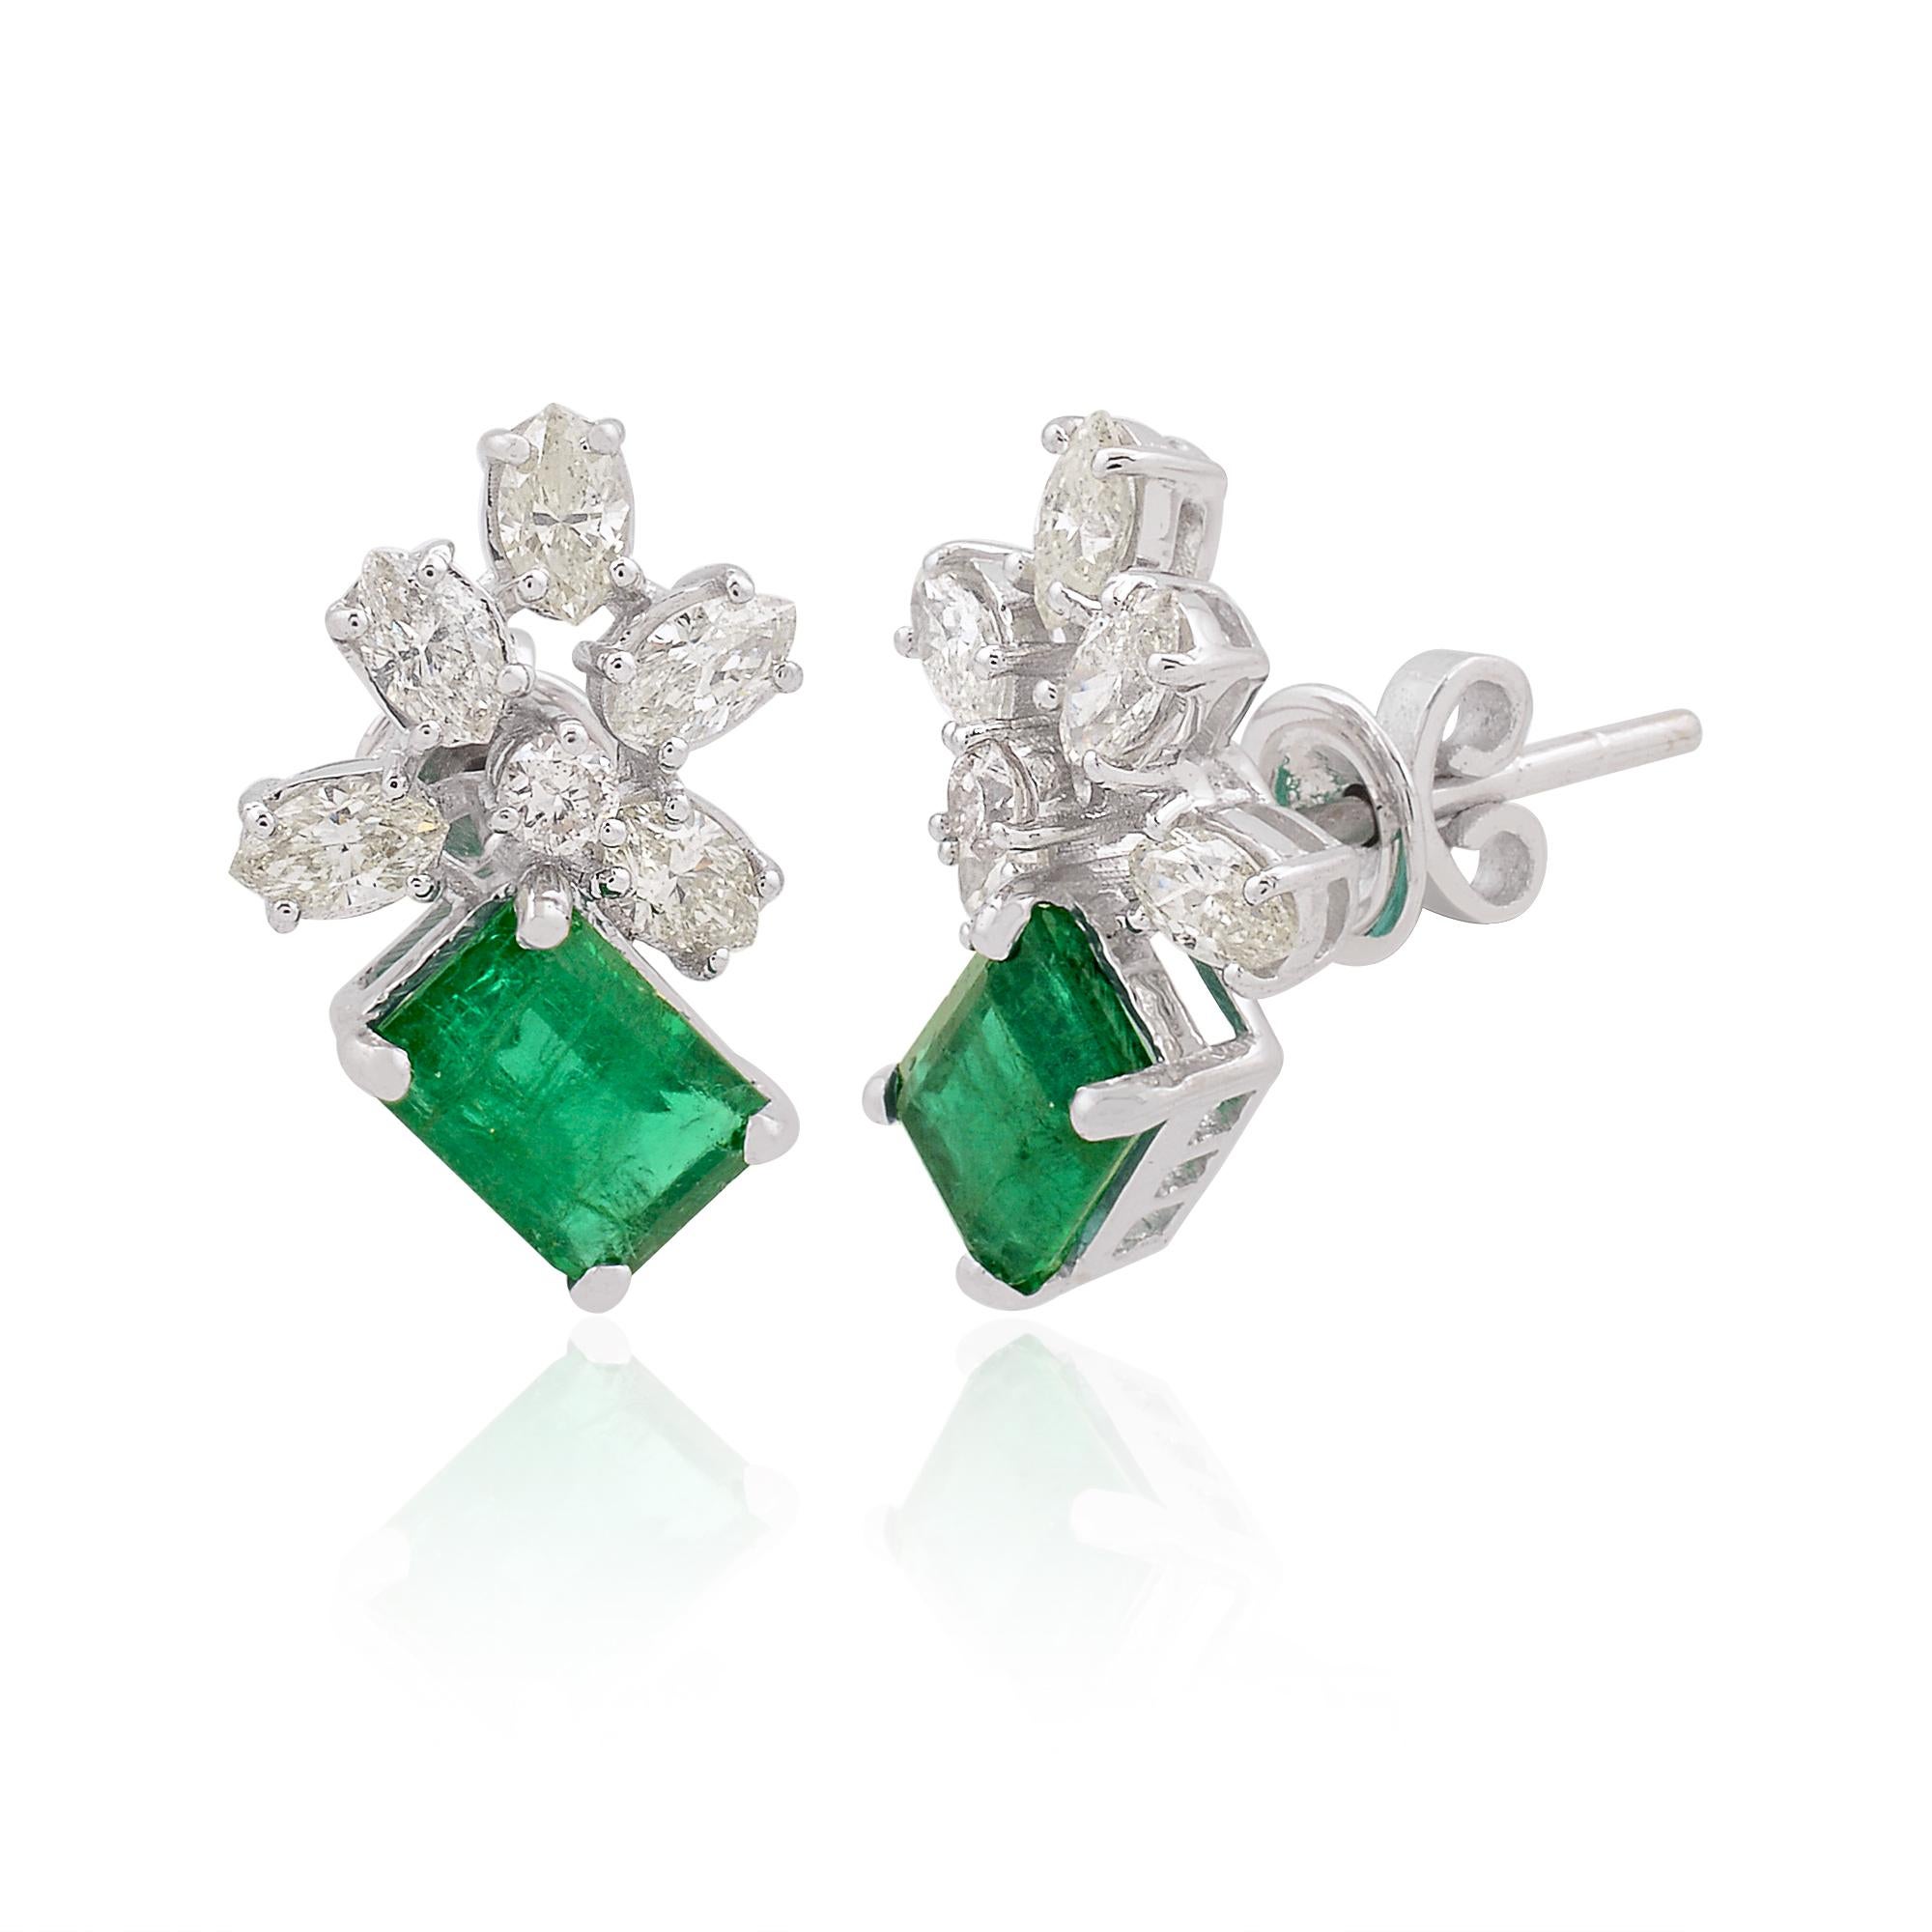 Item Code :- SEE-11435
Gross Wt :- 4.05 gm
18k White Gold Wt :- 3.42 gm
Diamond Wt :- 1.04 carat  ( AVERAGE DIAMOND CLARITY SI1-SI2 & COLOR H-I )
Emerald Wt :- 2.09 carat
Earrings Size :- 15x9 mm approx.
✦ Sizing
.....................
We can adjust